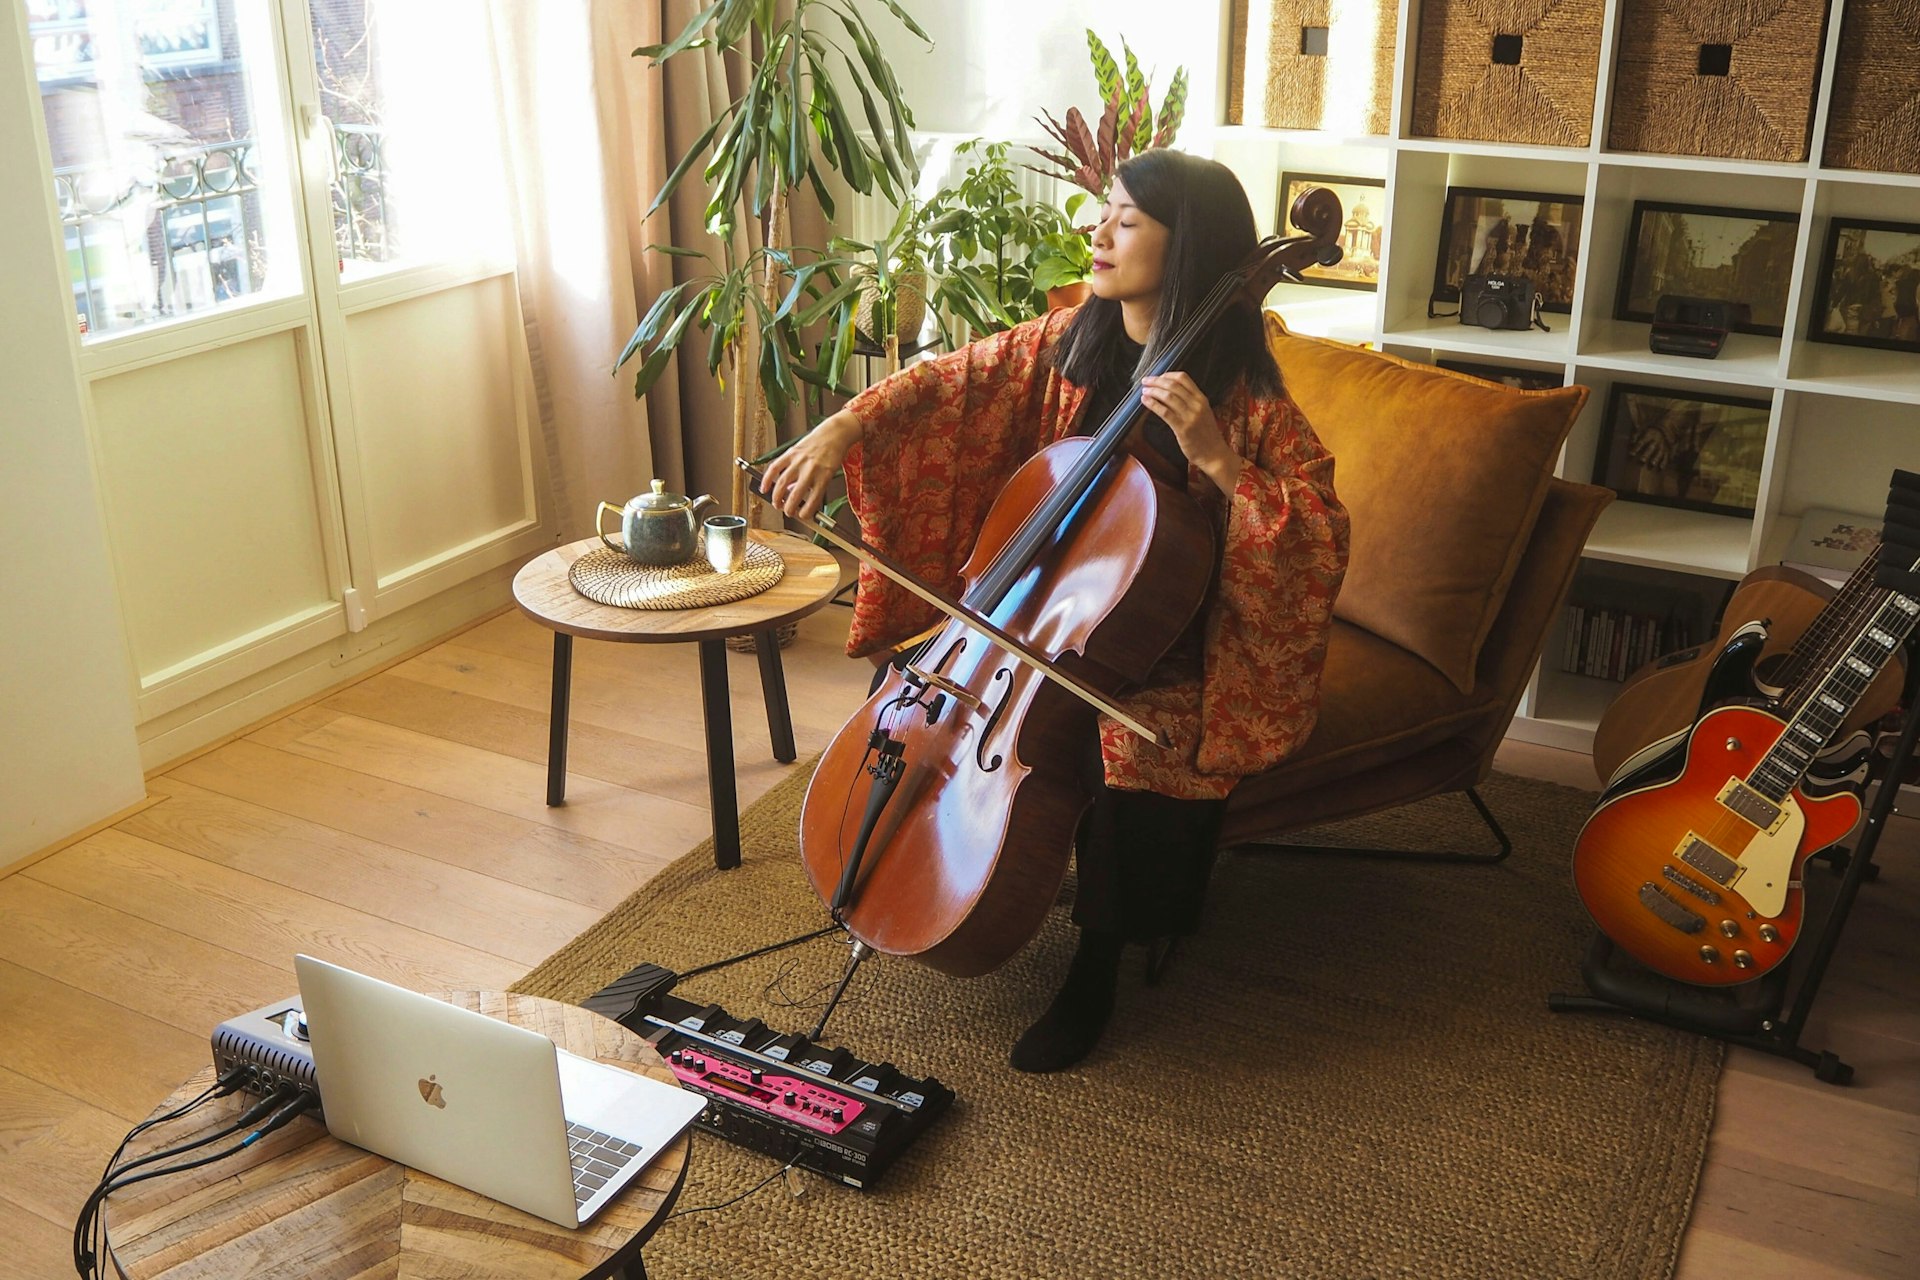 A woman playing a cello to an online audience via computer